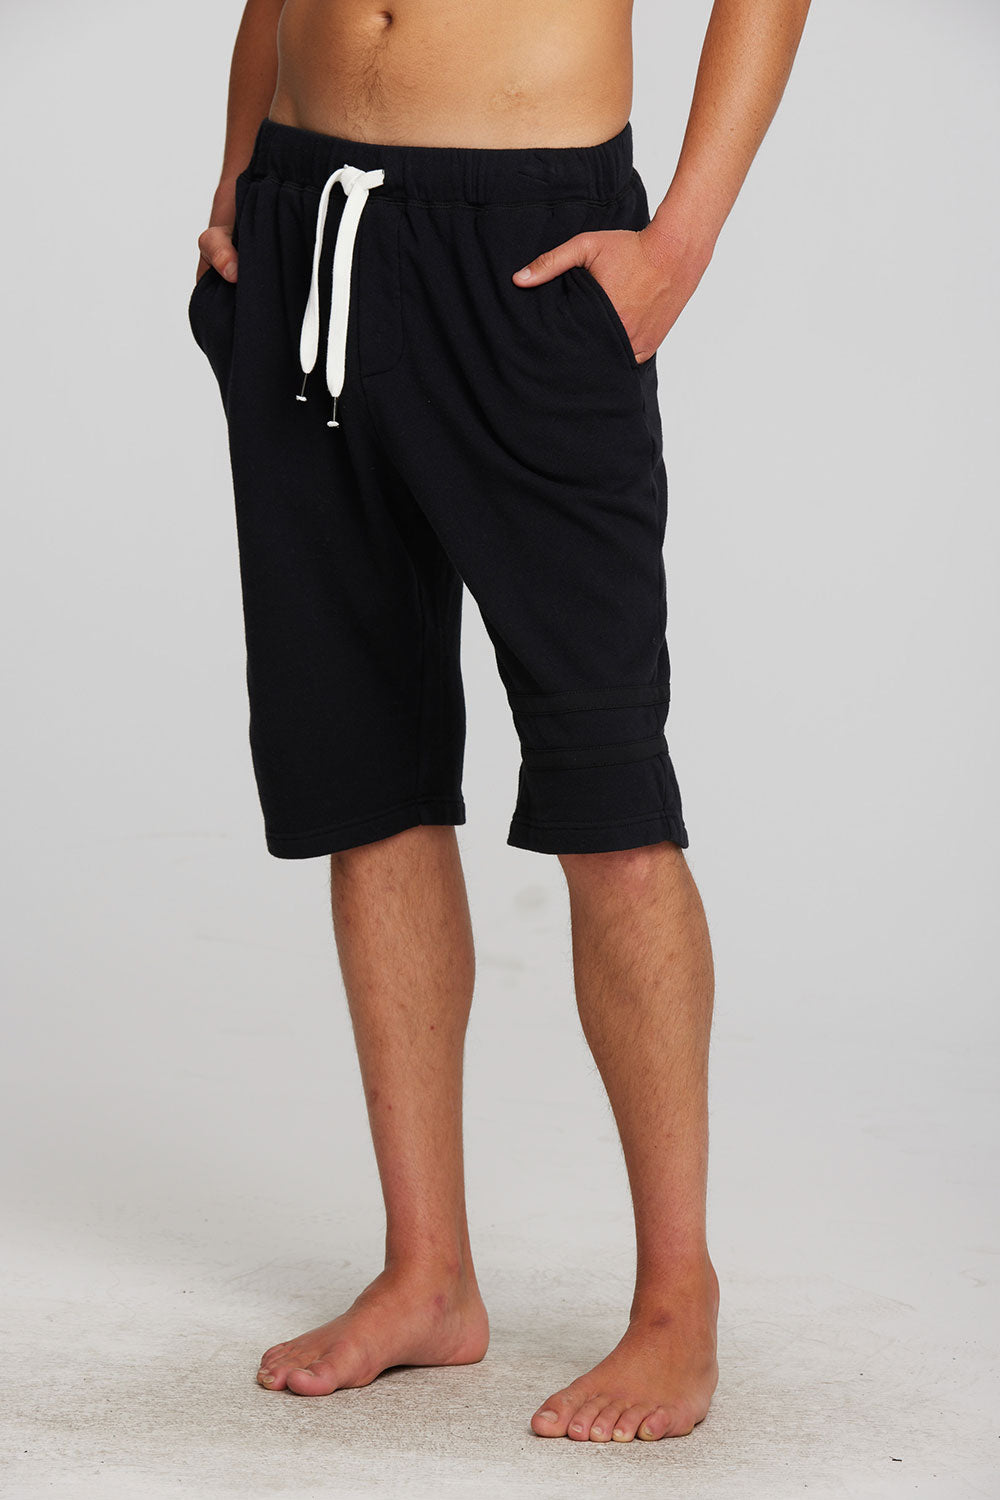 Cotton Fleece Shorts with Strappings Mens chaserbrand